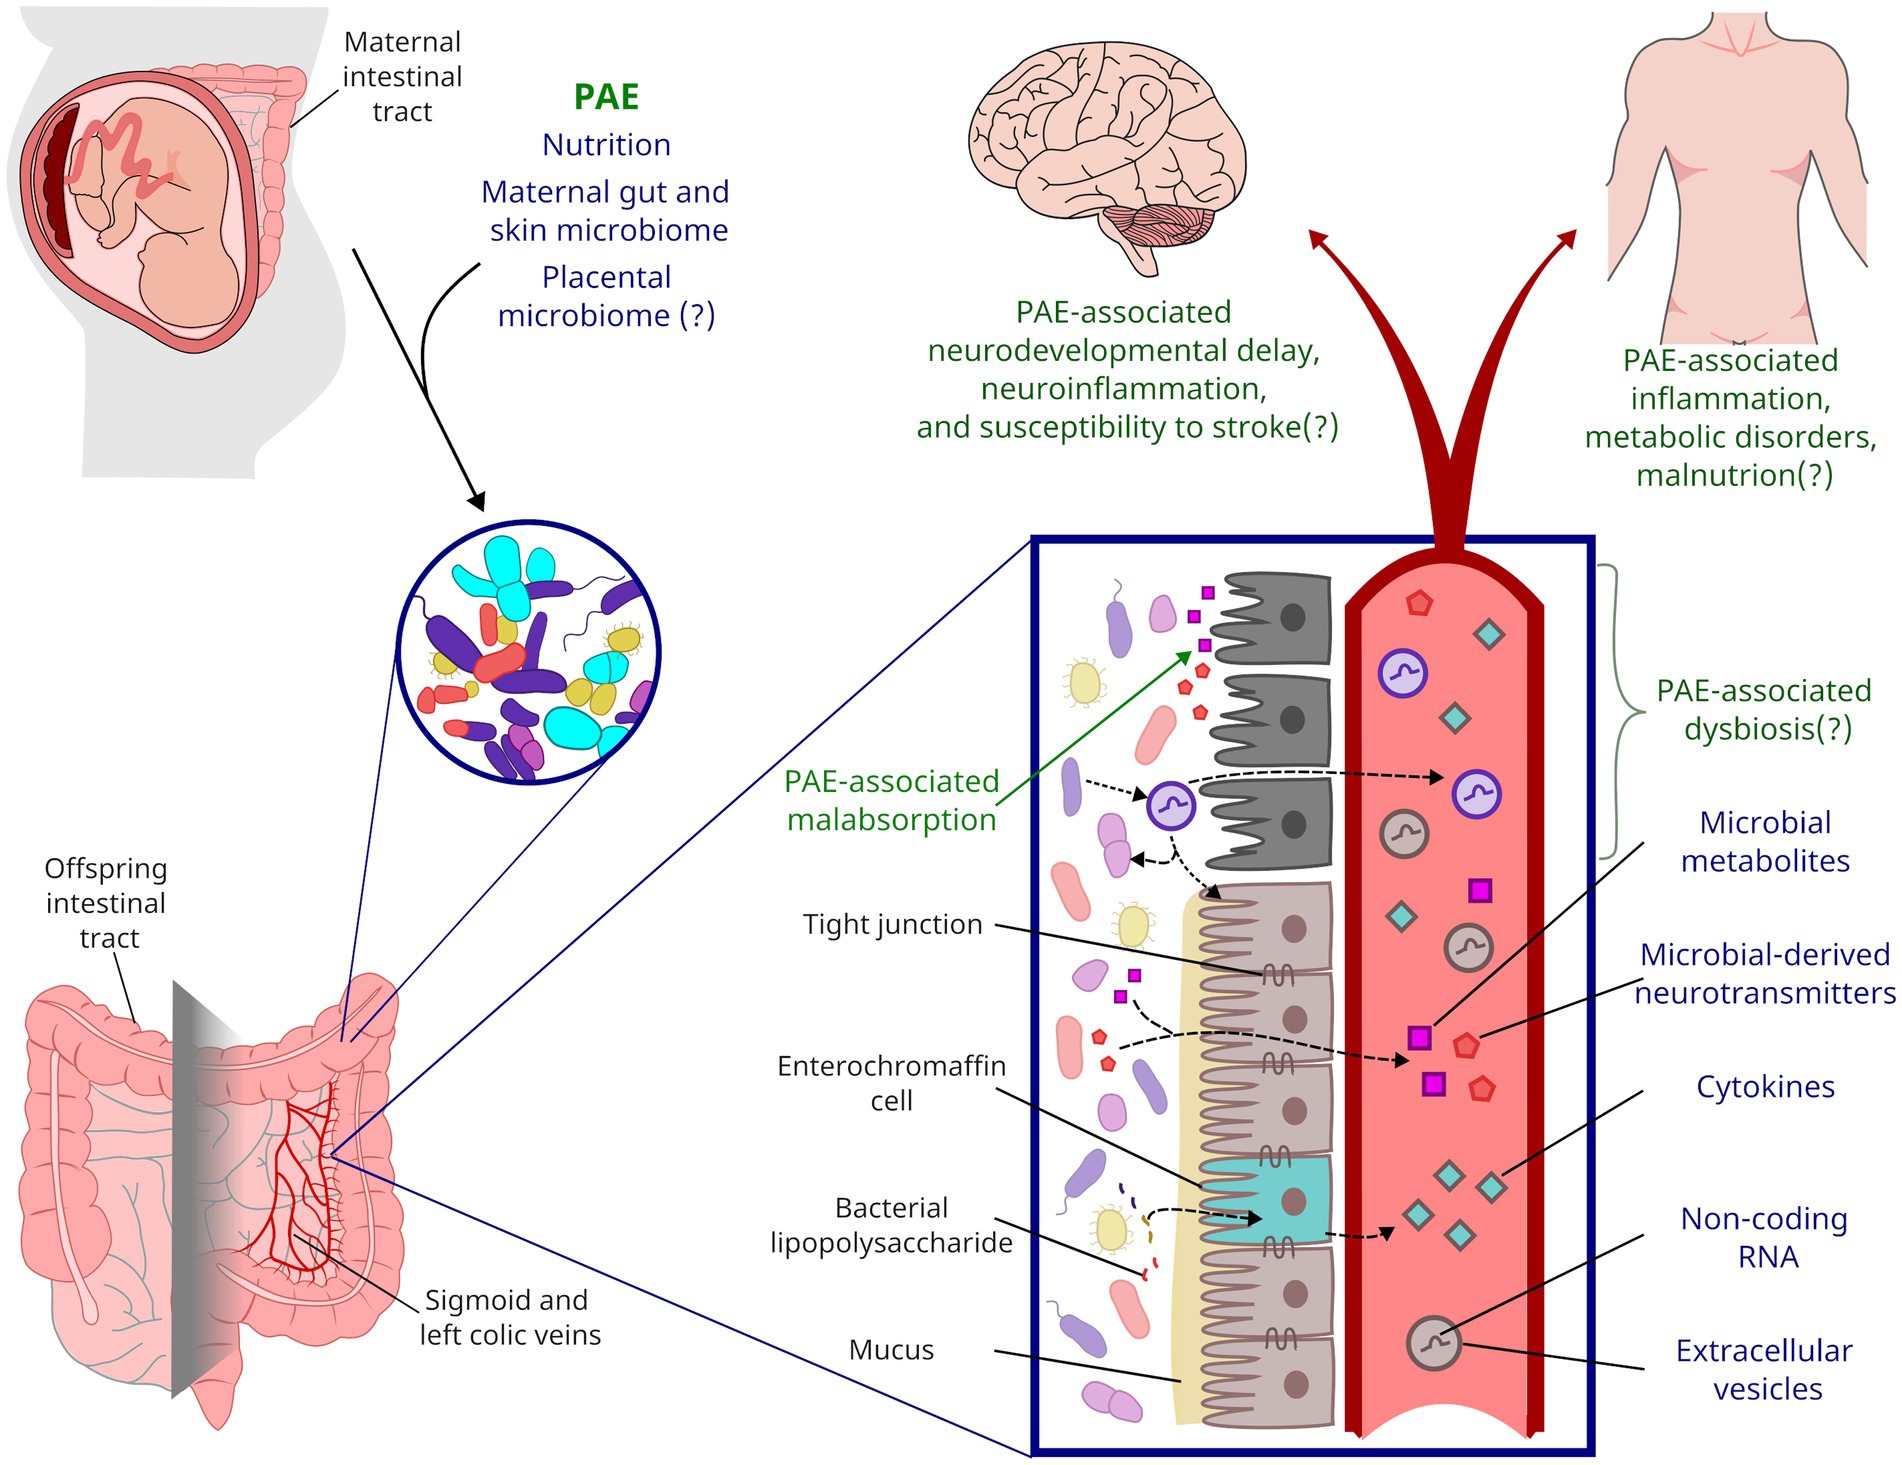 Frontiers Microbiota and nutrition as risk and resiliency factors following prenatal alcohol exposure